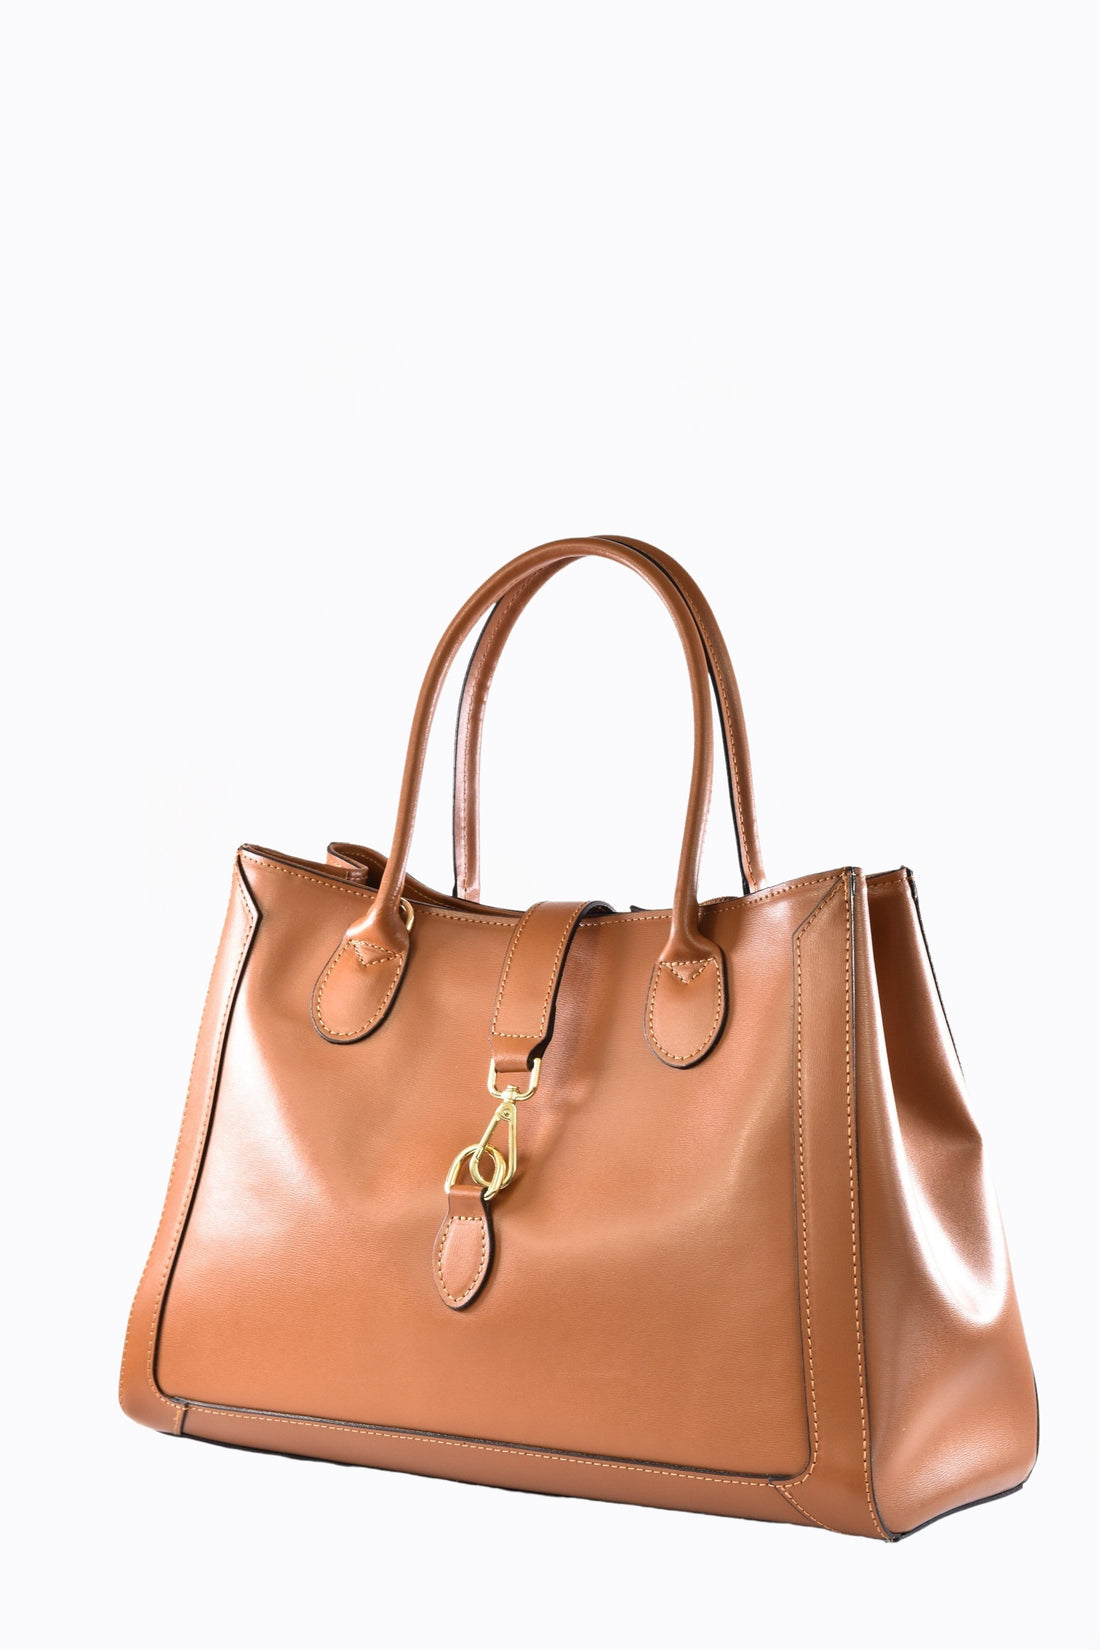 Chloe bag in Cuoio brushed leather